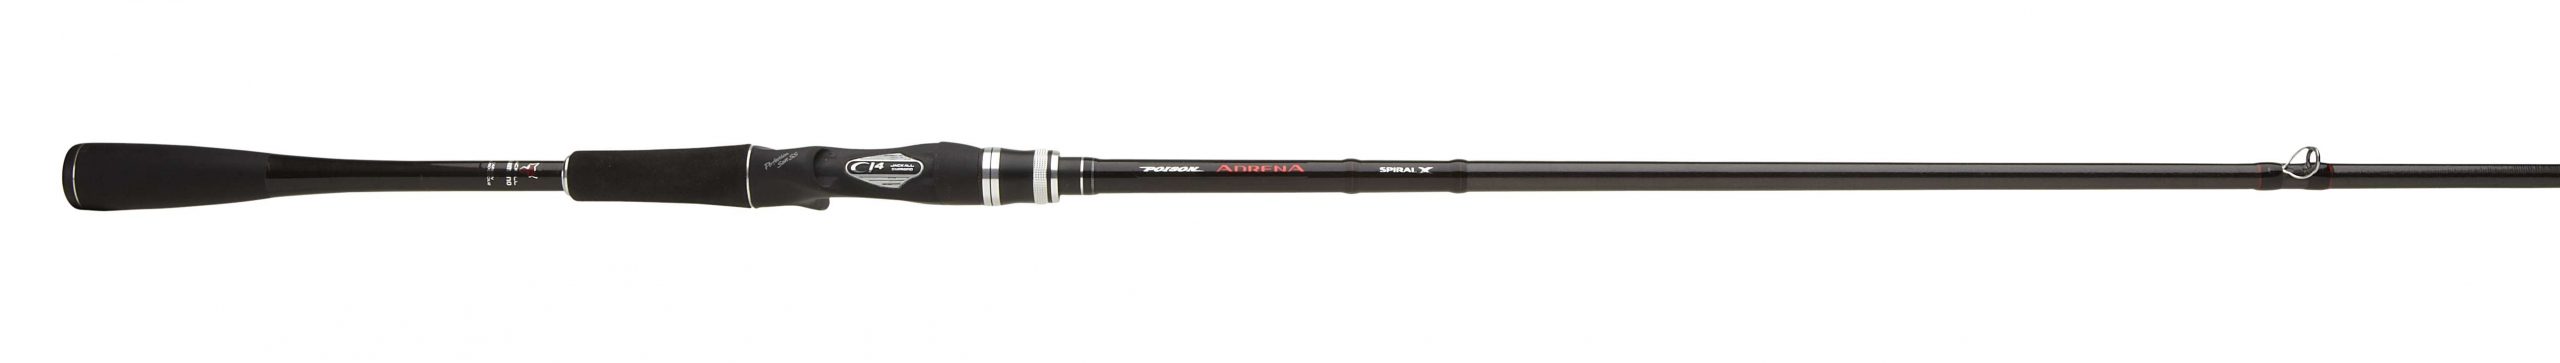 If you can appreciate high-quality stuff, you'll love the new Poison Adrena line from Shimano and Jackall. They're made with the finest components and the best hand-picked actions from Jackall's pro staff.